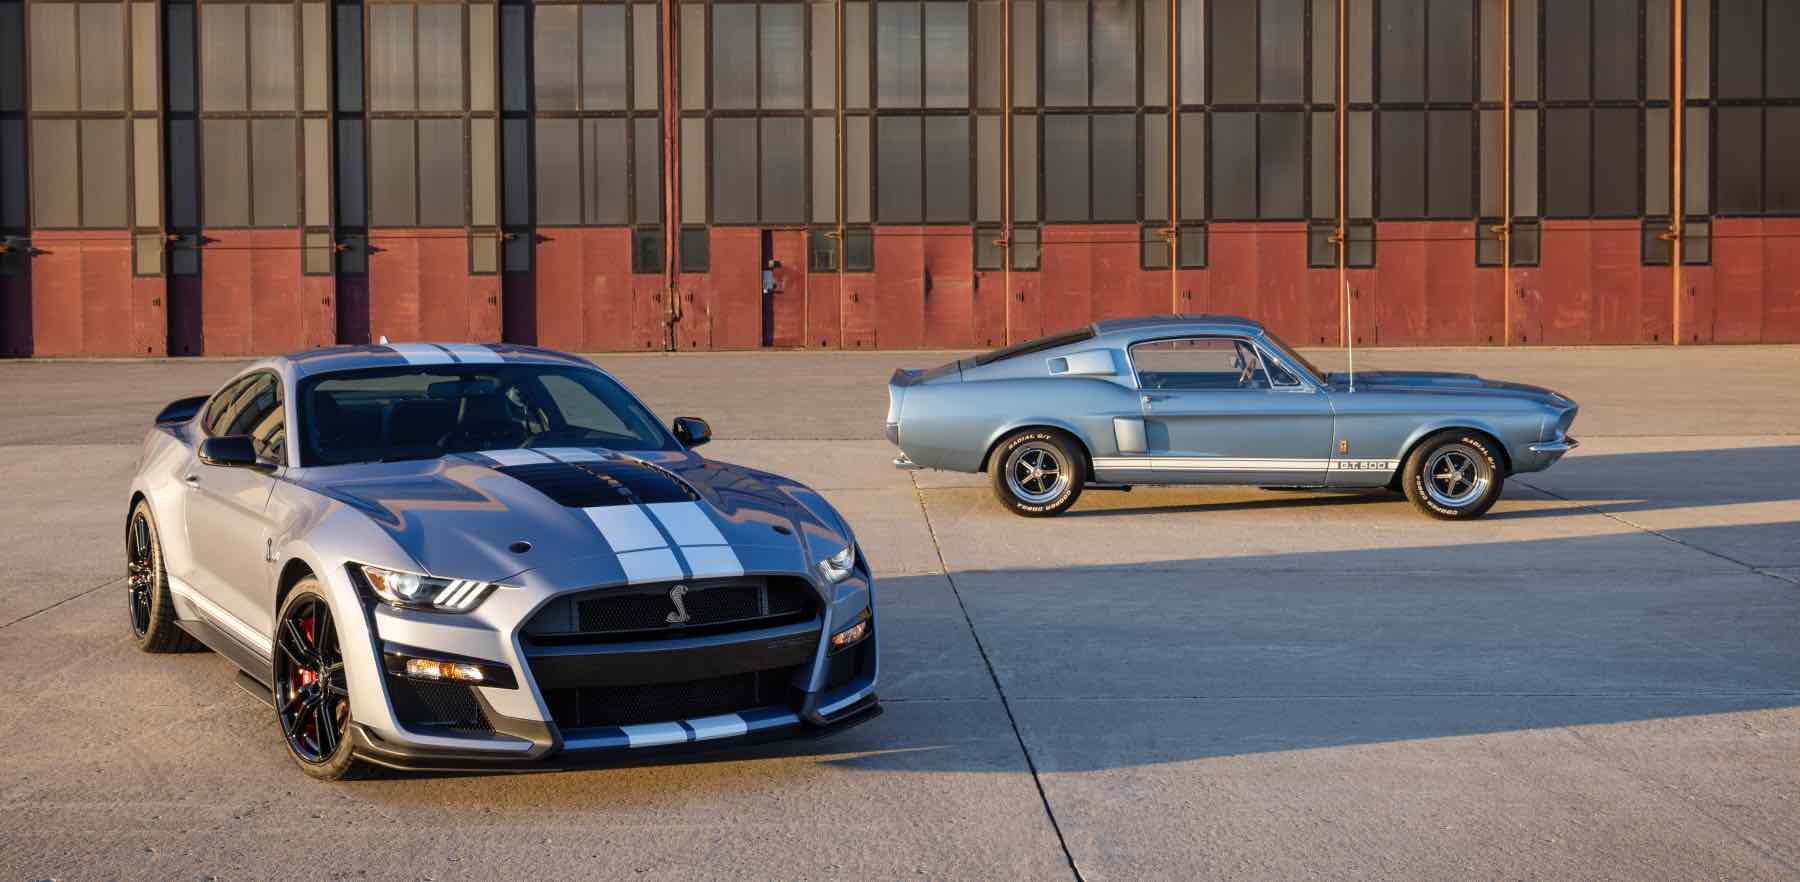 2022 Ford Mustang GT500 Heritage Edition Throws Back to the 1967 Original: News Fast Lane Car